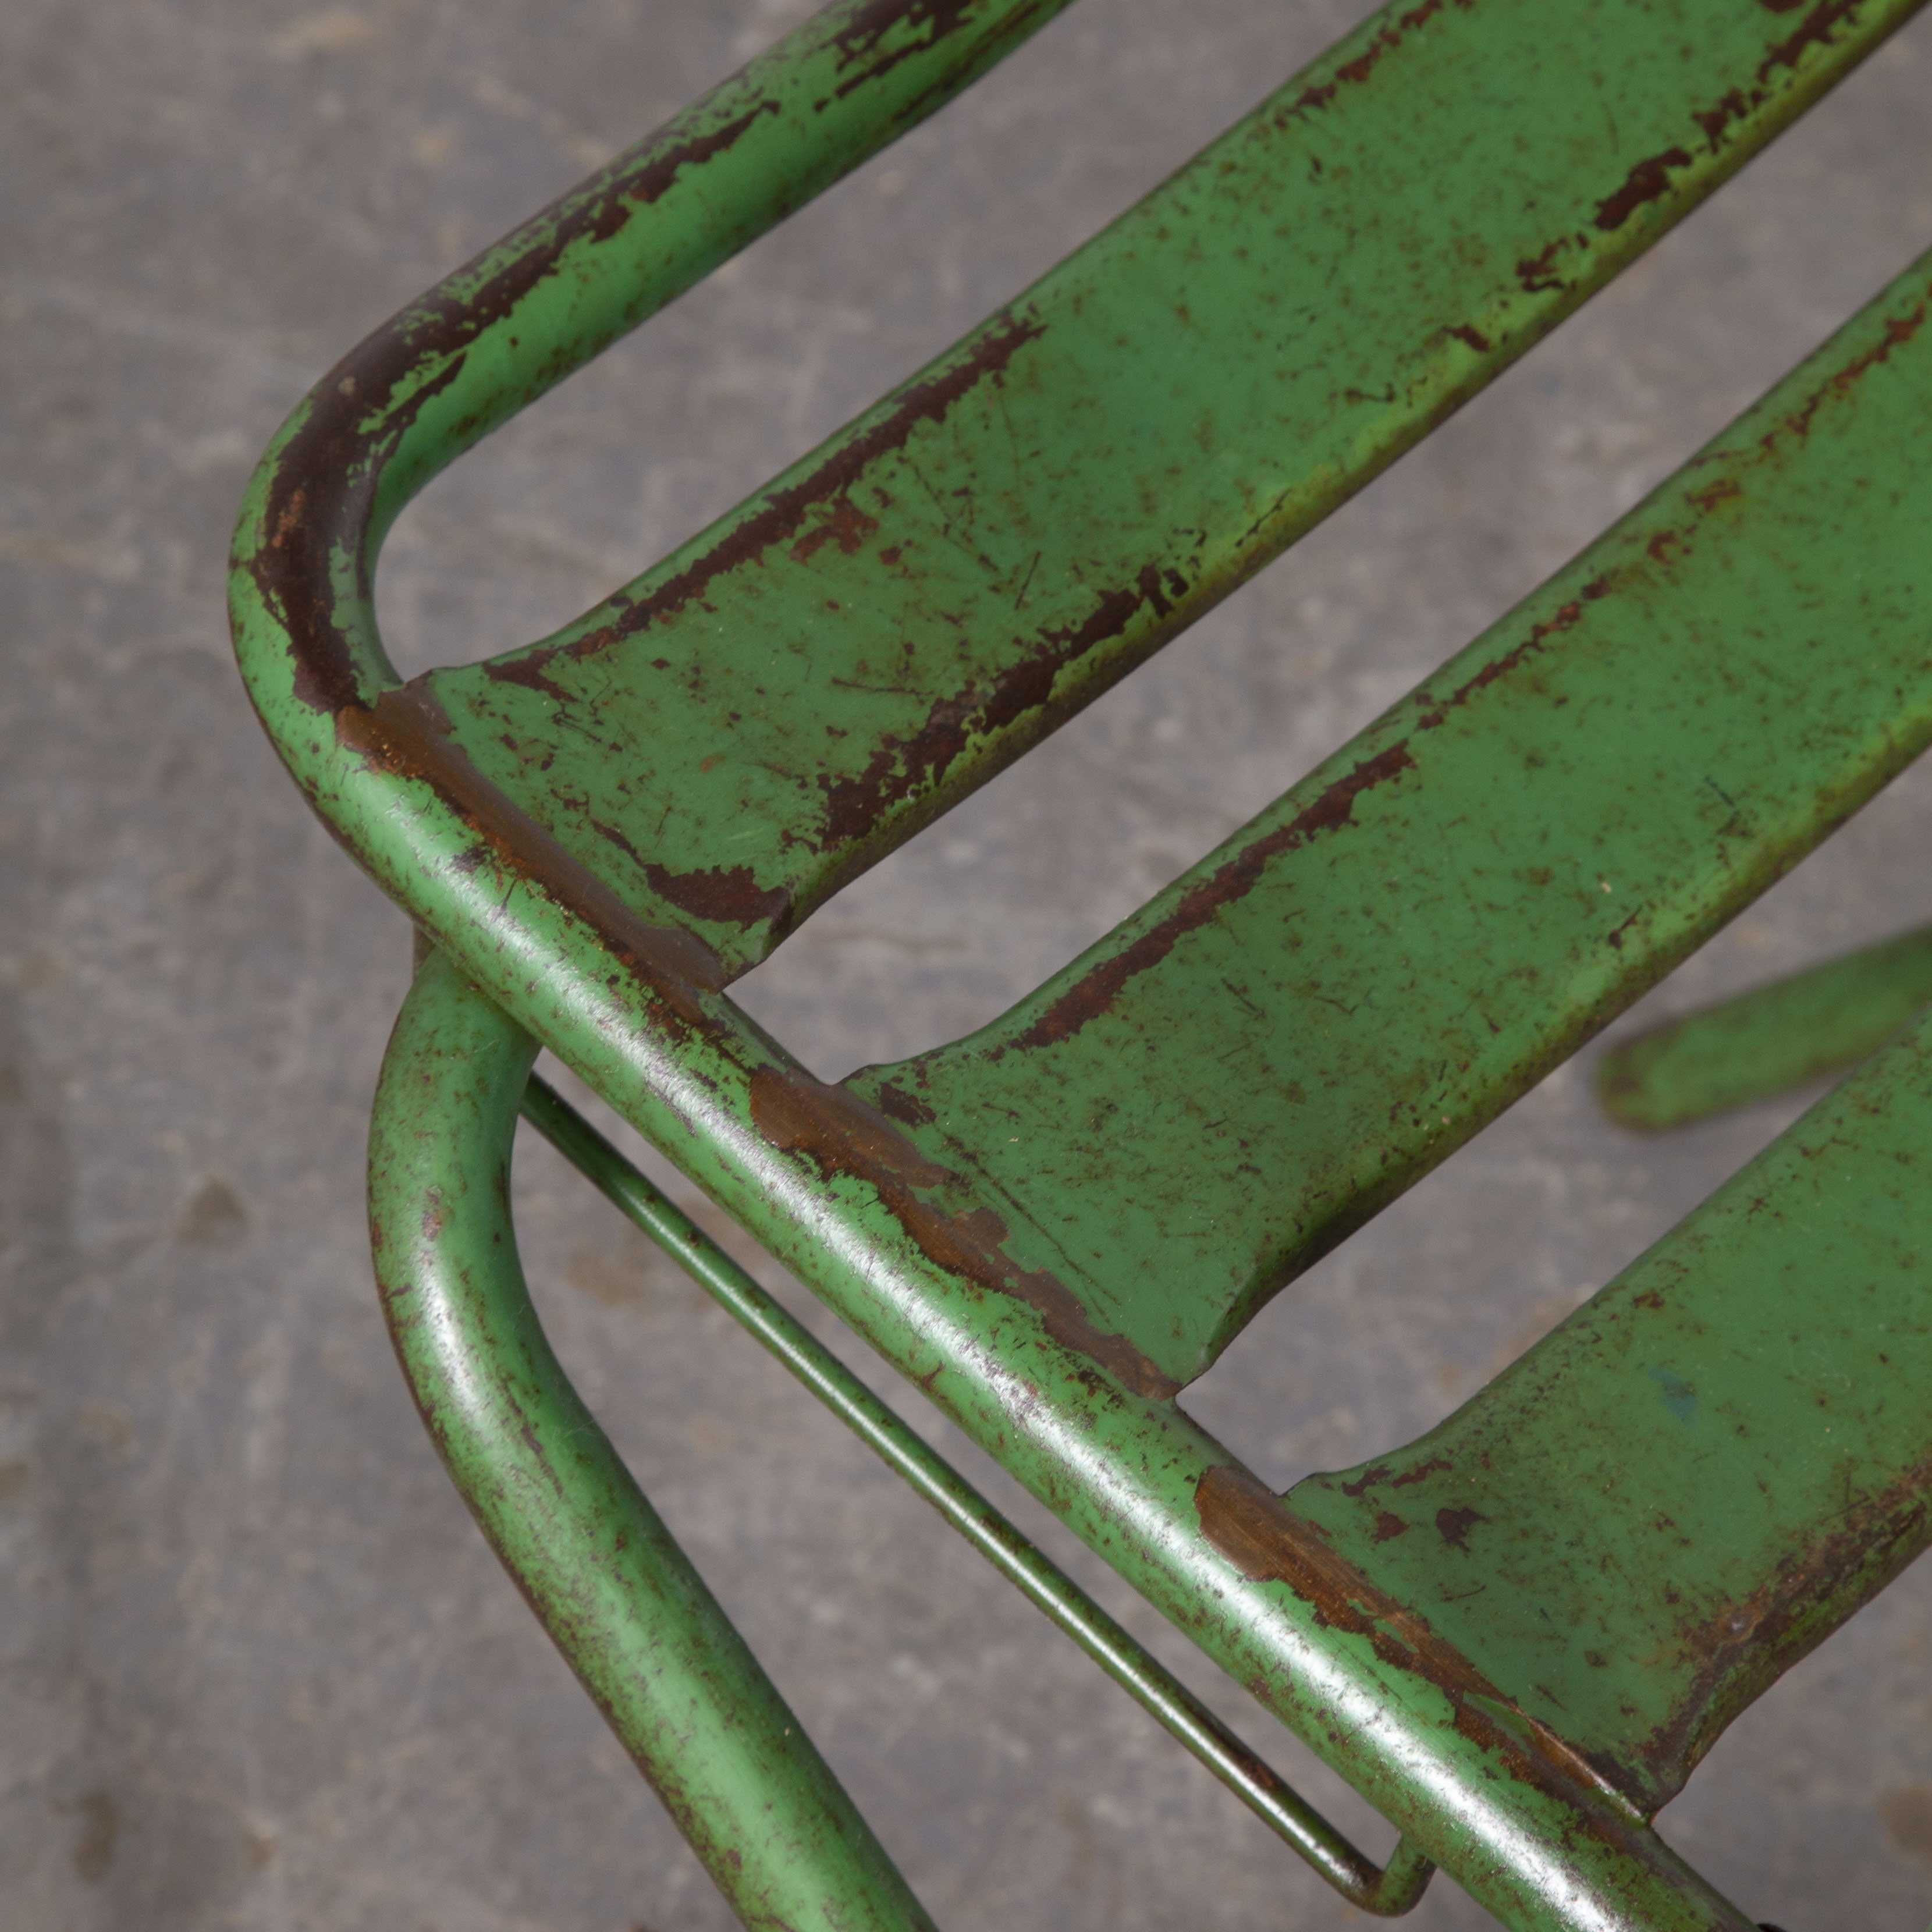 1960s French green metal folding chairs, set of eight

1960s French green slatted metal folding chairs, set of eight. Very good quality French folding chairs from the 1960s, we don’t know the history or the maker but they are heavy and solid with